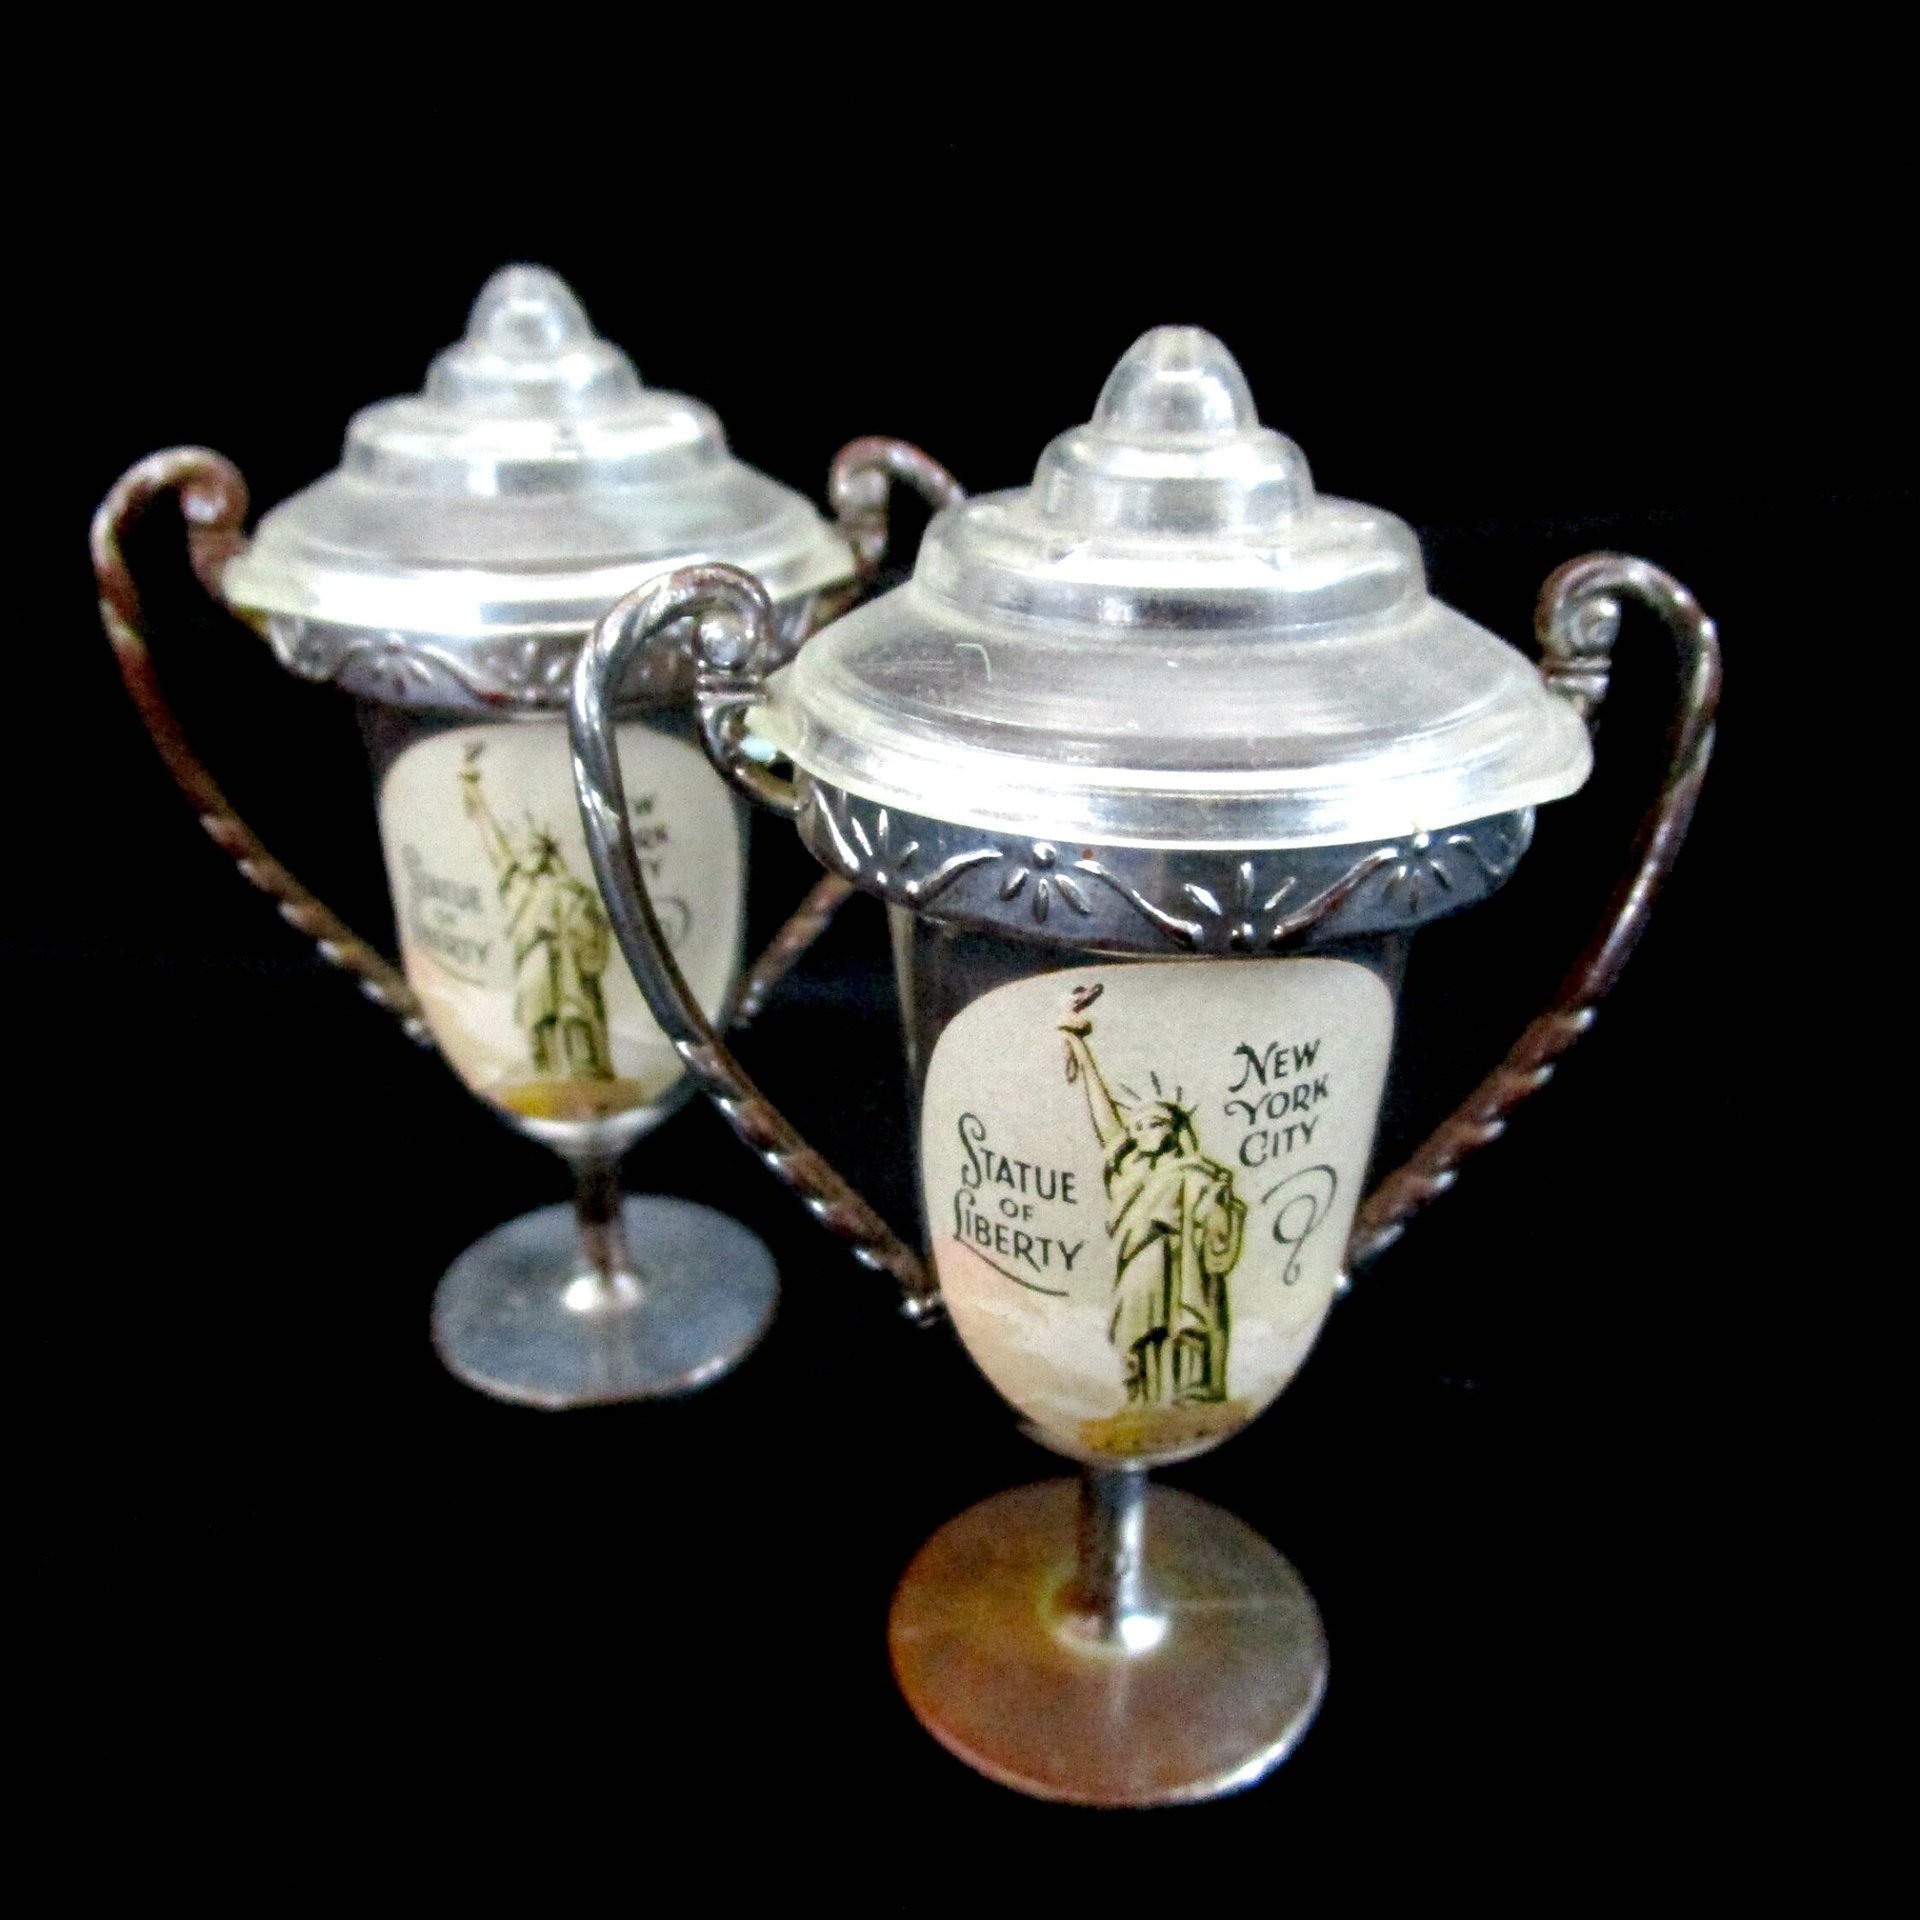 New York City, Salt and Pepper Shakers, Statue of Liberty,  New York Souvenir,  Silver Loving Cup Shakers, 1930s, Make Offer